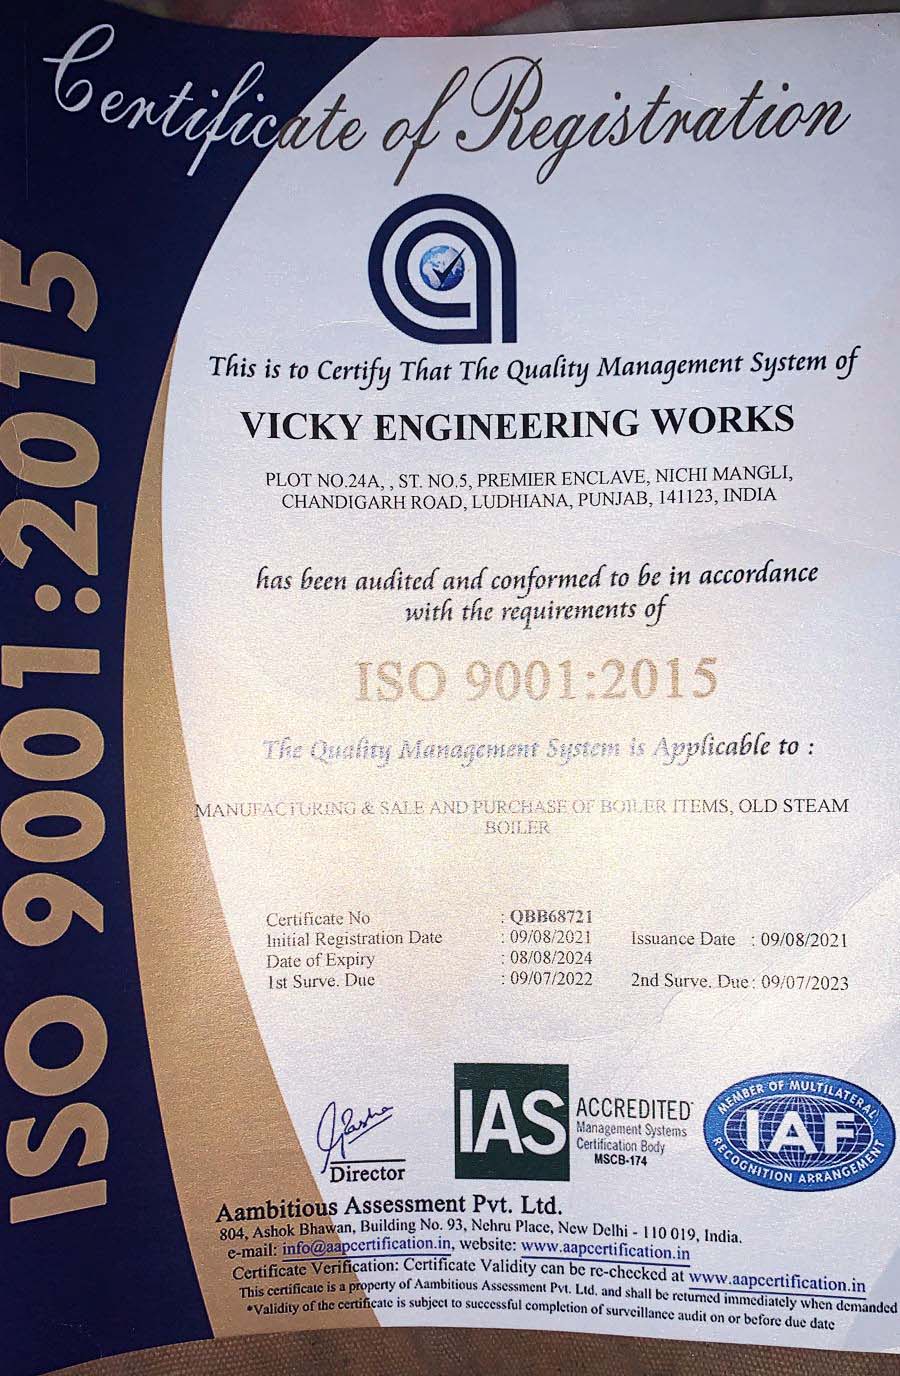 ISO Certificate Image